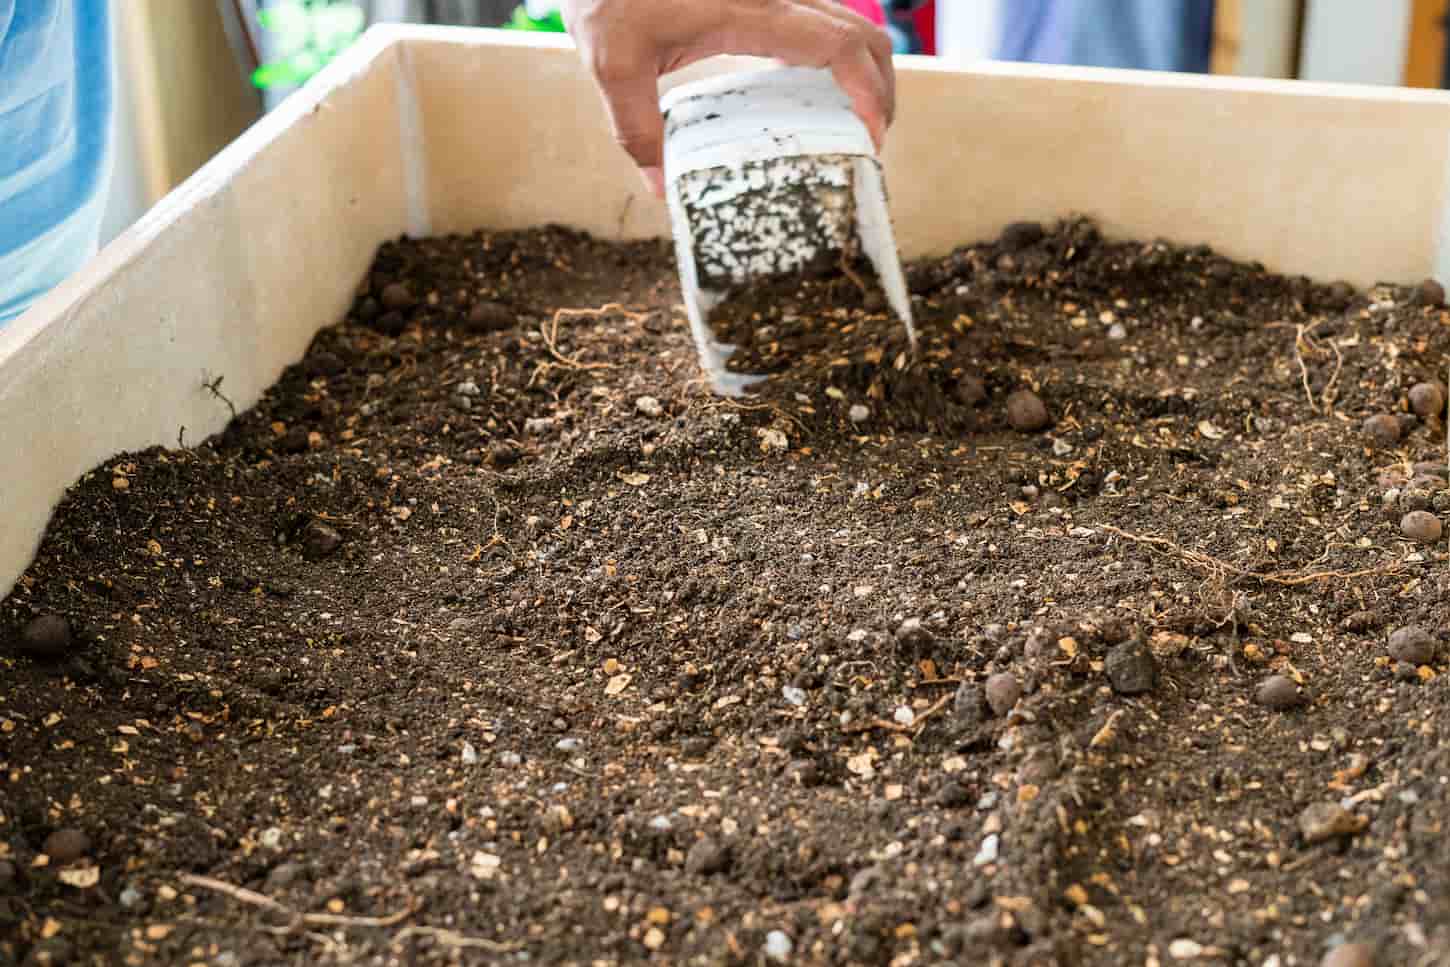 An image of soil and compost mixture in a planter box.